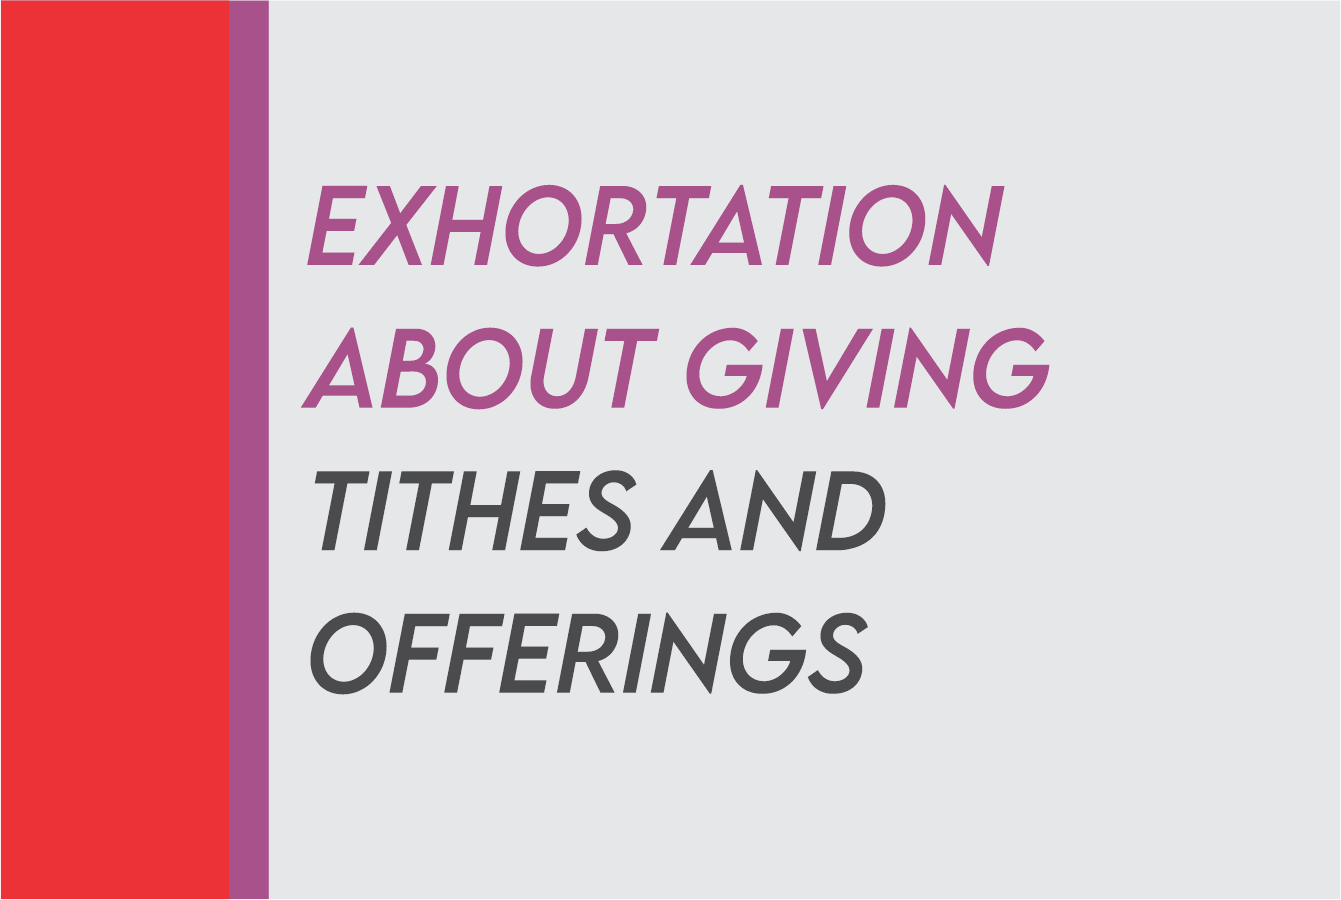 Short Exhortation About Giving Tithes And Offering